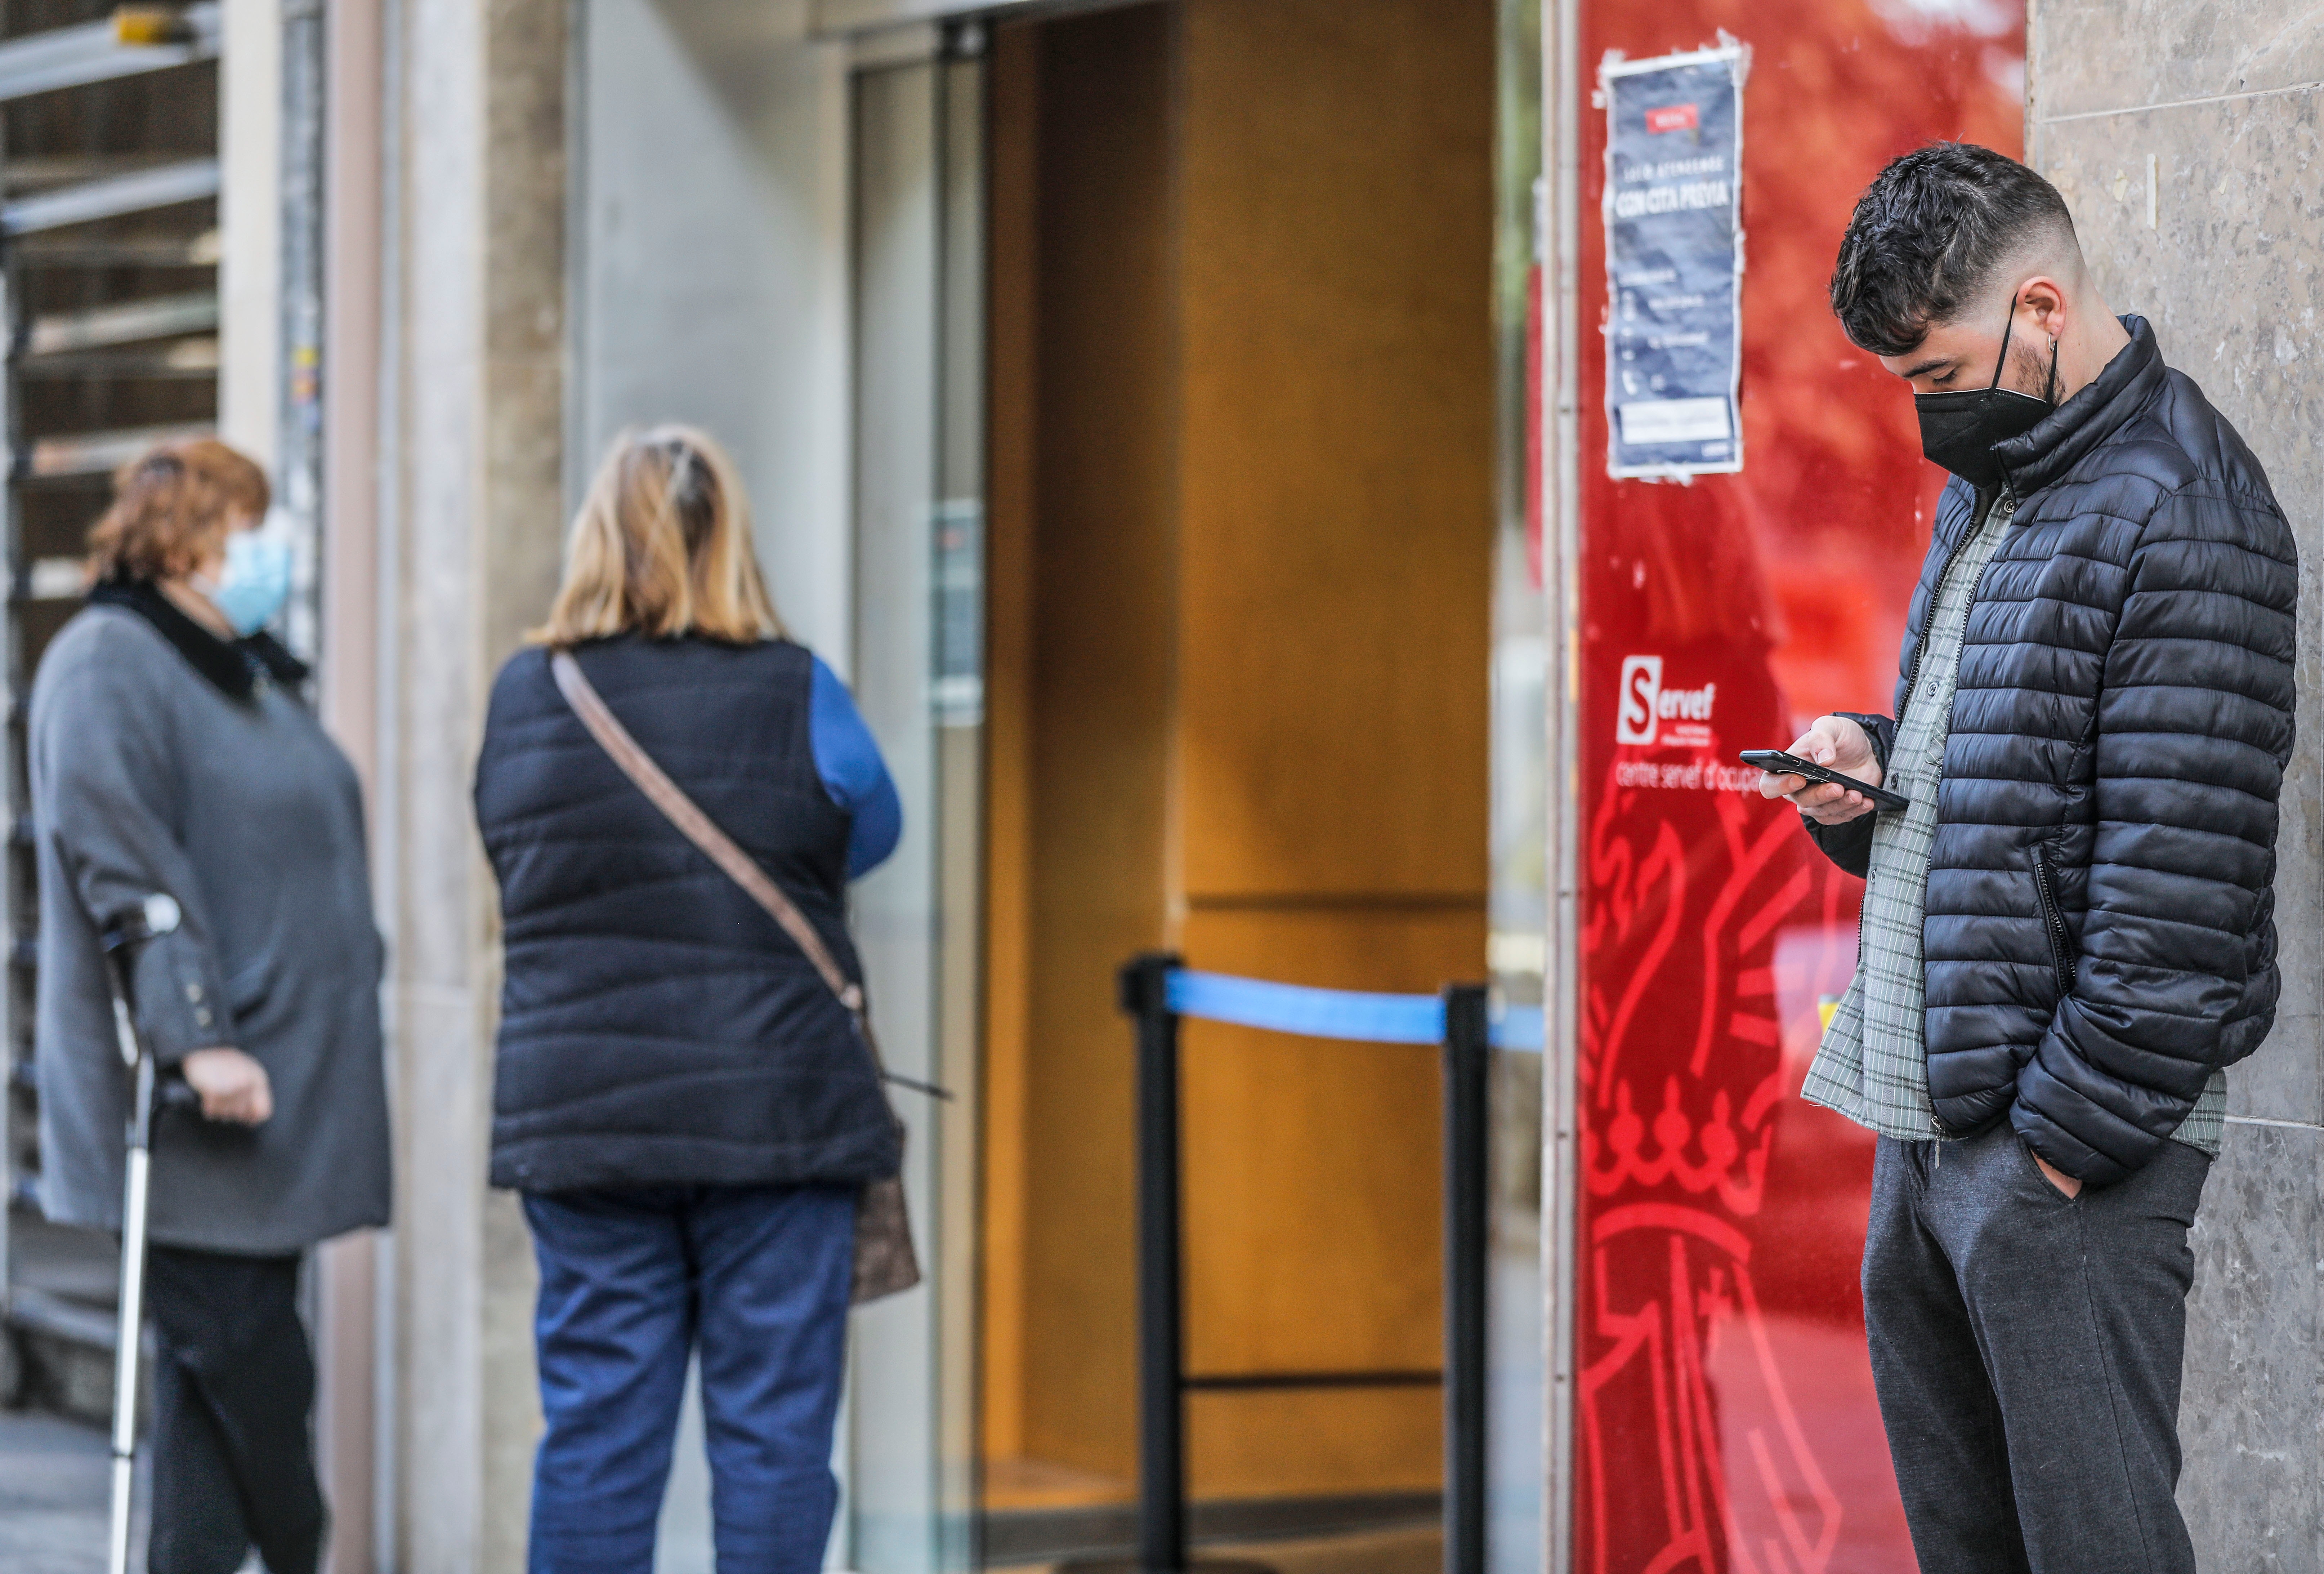 A young man looks at his mobile phone while waiting to enter a SEPE office in Valencia.